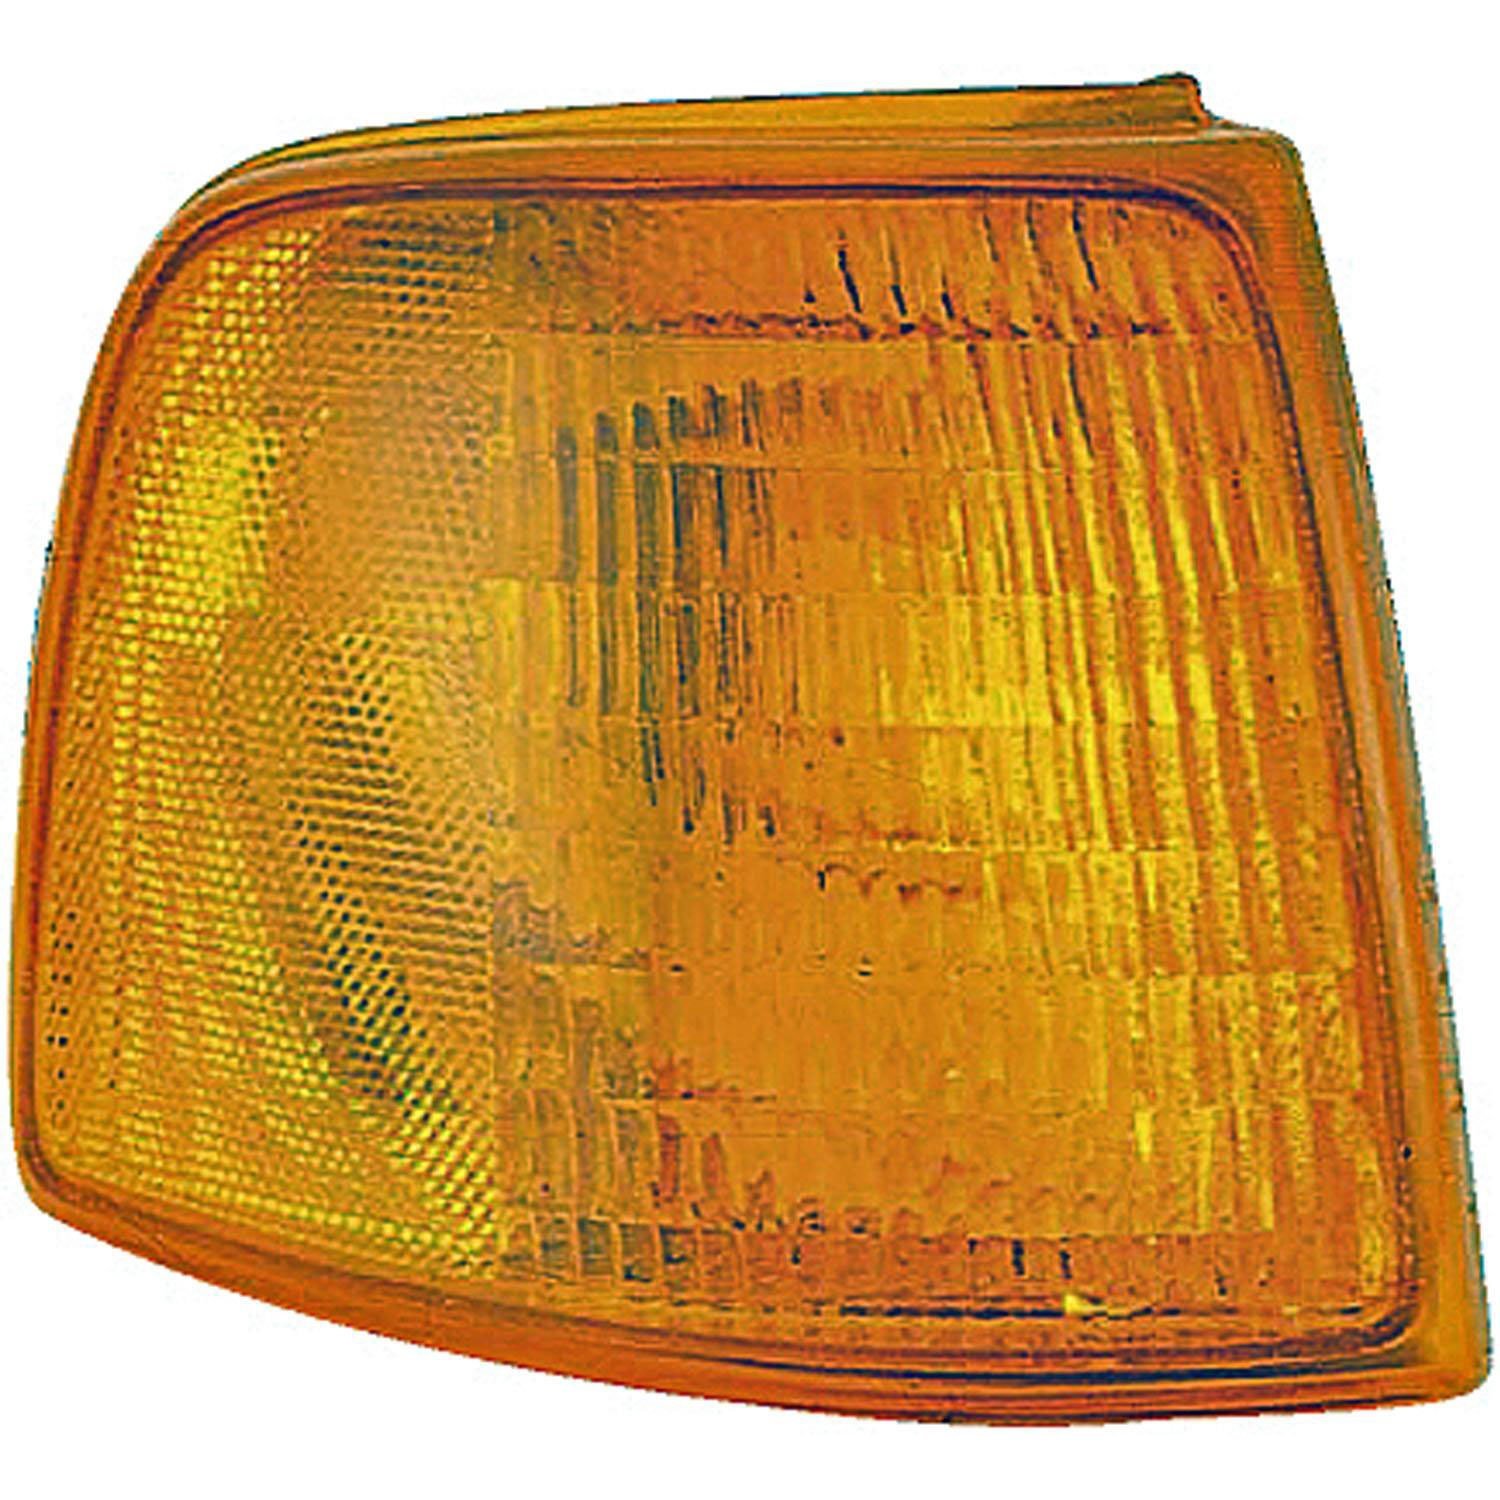 Parking / Turn Signal Lamp Assembly